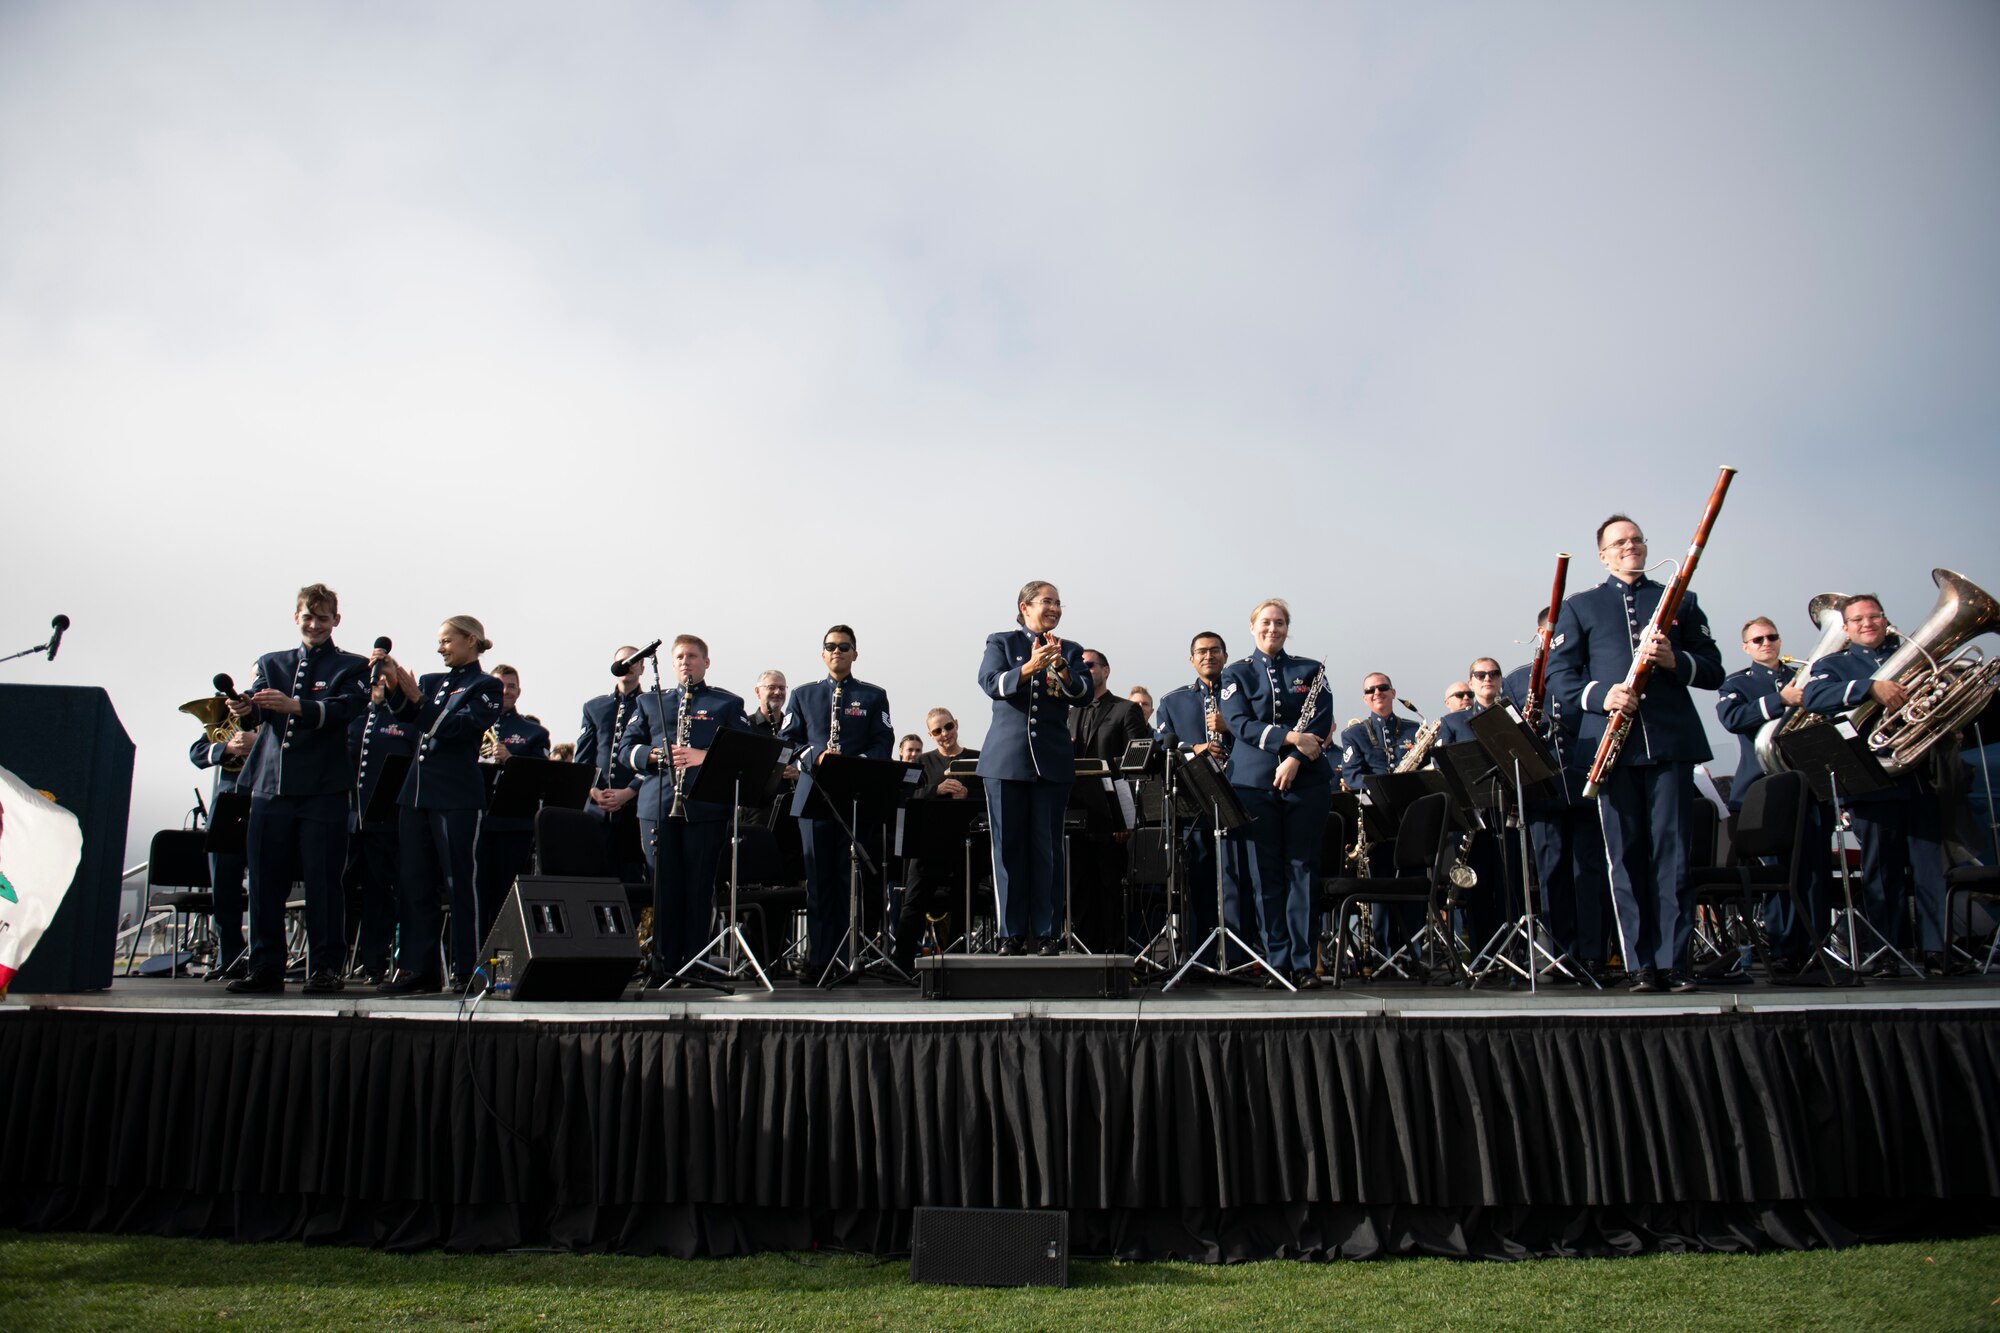 The U.S. Air Force Band of the Golden West from Travis Air Force Base, California, stands after completing their concert performance at the Presidio Tunnel Tops, San Francisco, California, Oct. 6, 2022.